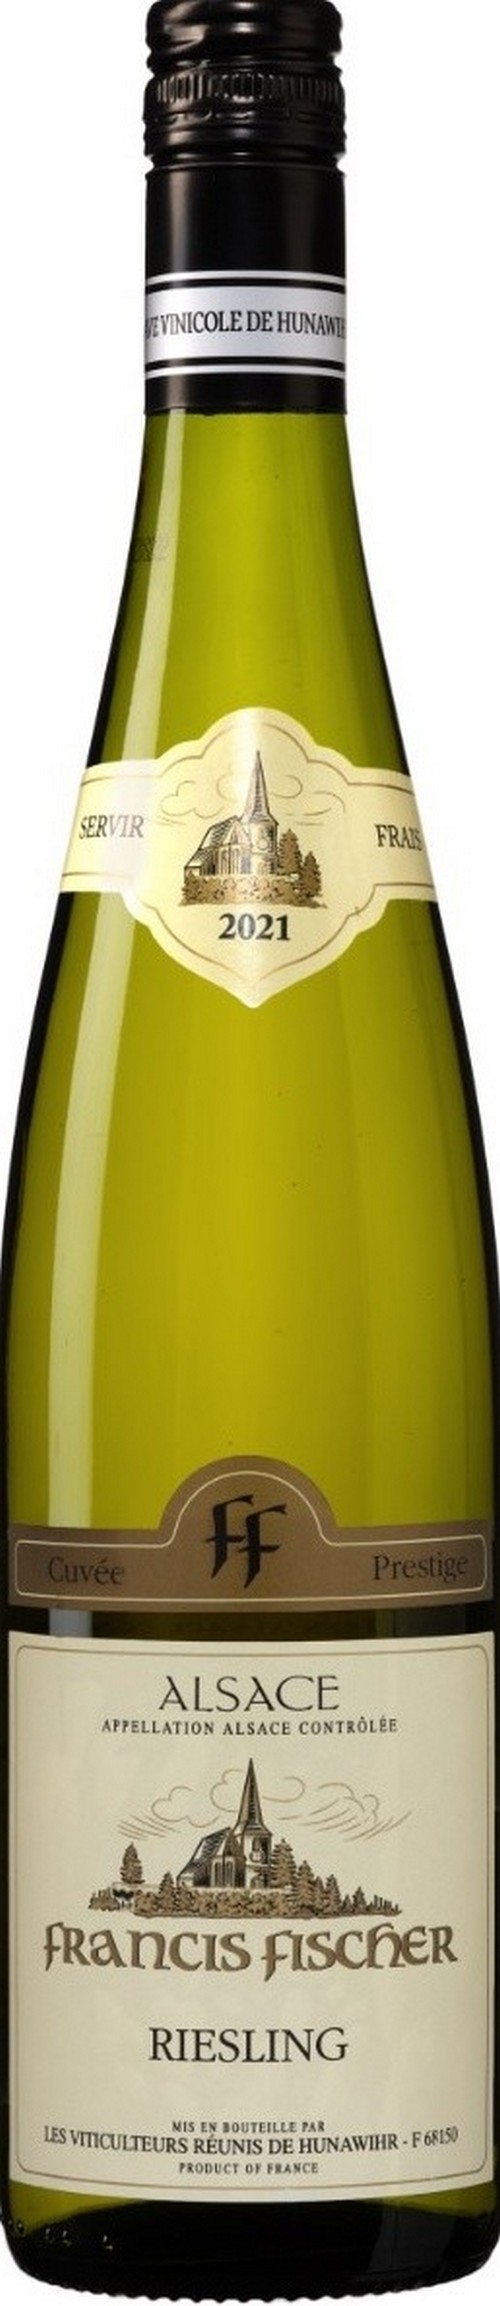 francis-fischer-riesling-2021